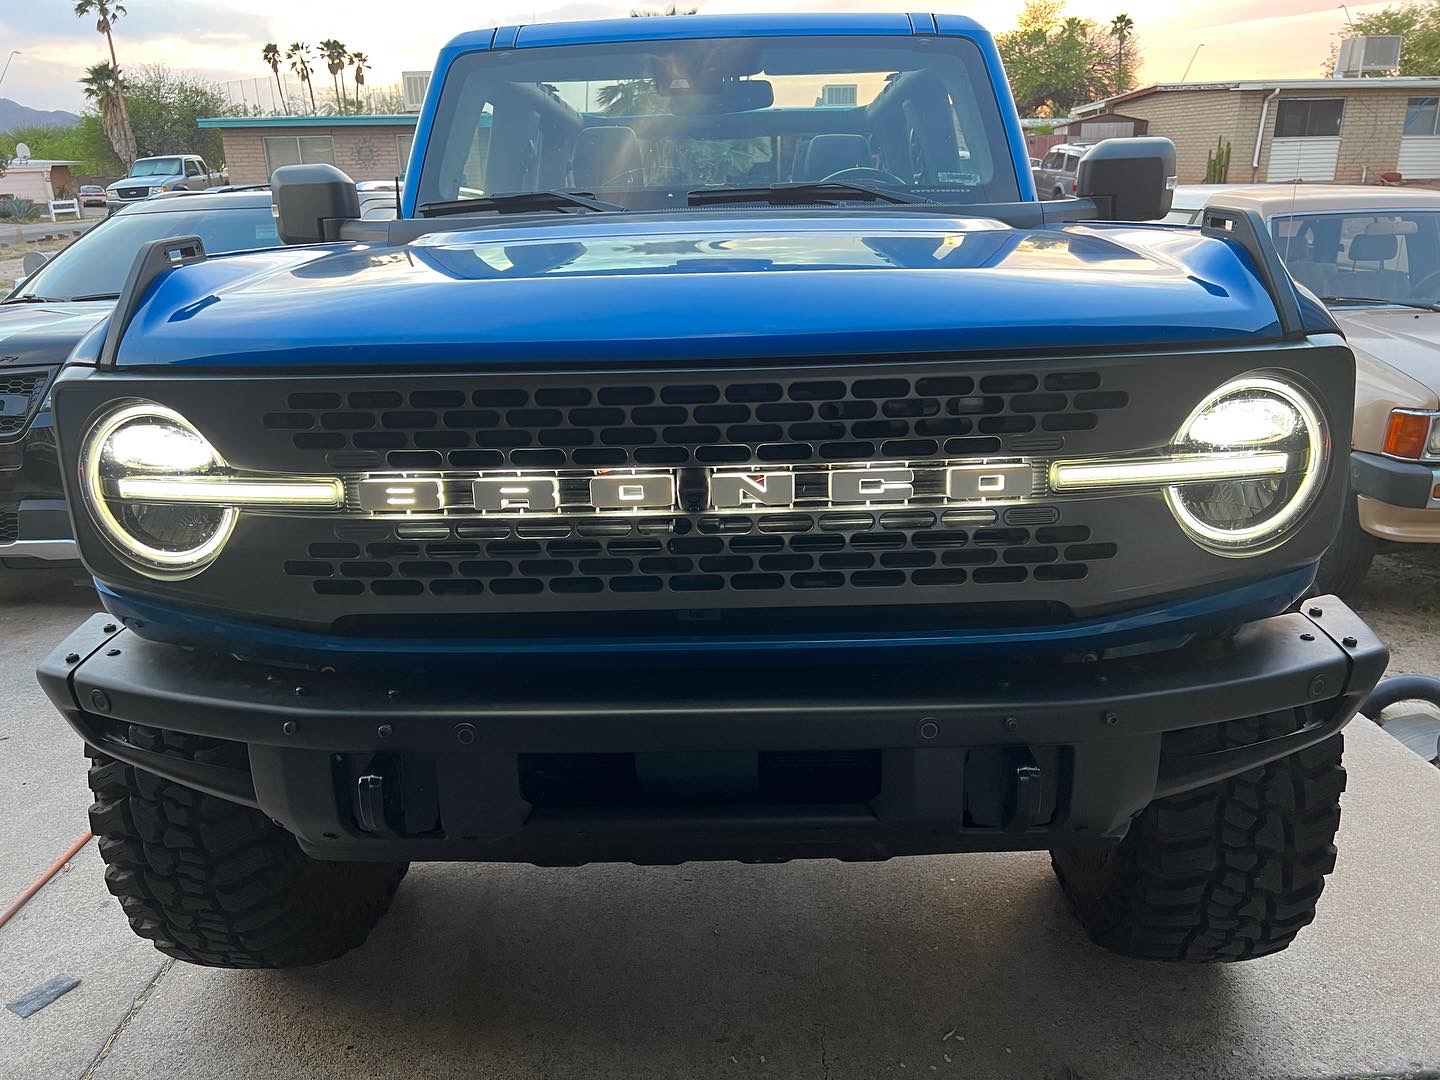 Ford Bronco NOW AVILABLE: : ORACLE Lighting: UNIVERSAL ILLUMINATED LED LETTERS 7545569A-8340-4198-BA89-3C3949662F54